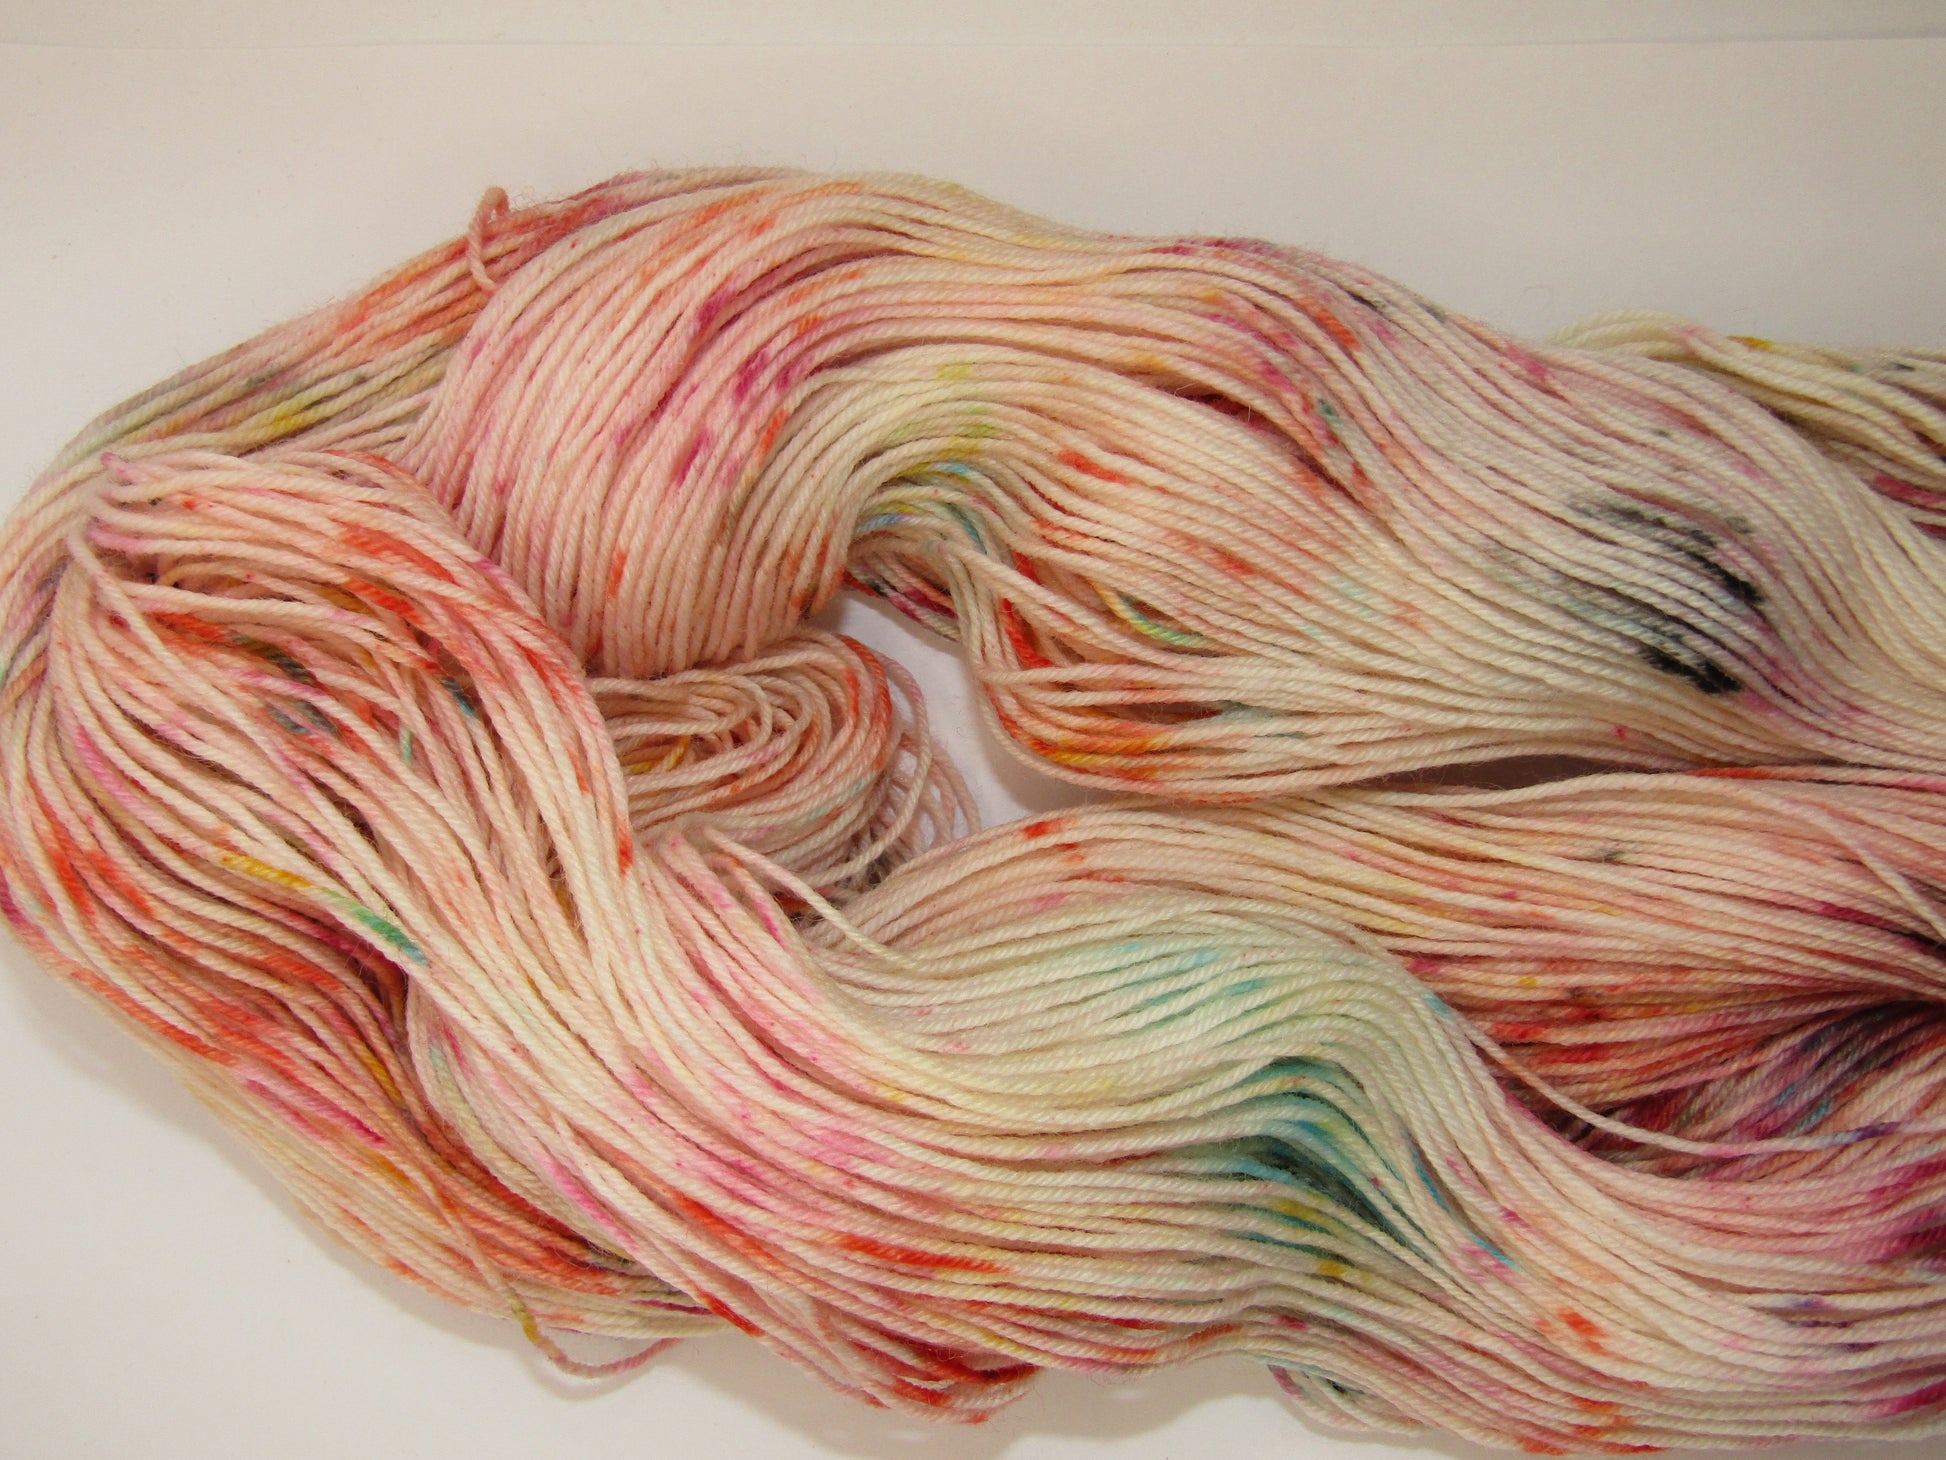 Hand-Dyed Yarn Confetti with speckles in blue, orange, red, pink, purple, black, and yellow.